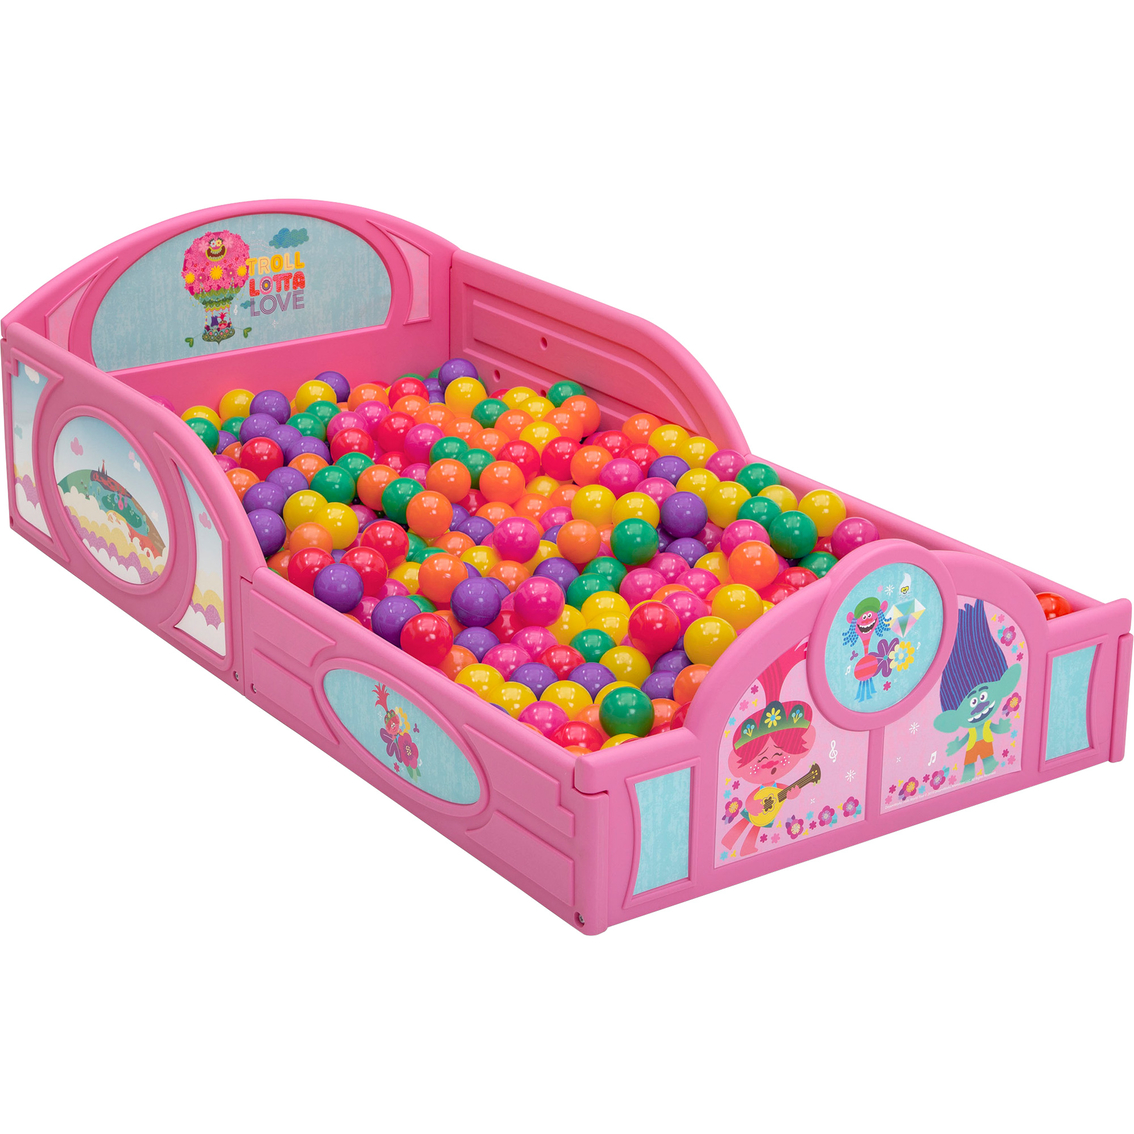 Delta Children Trolls World Tour Plastic Sleep and Play Toddler Bed - Image 6 of 9